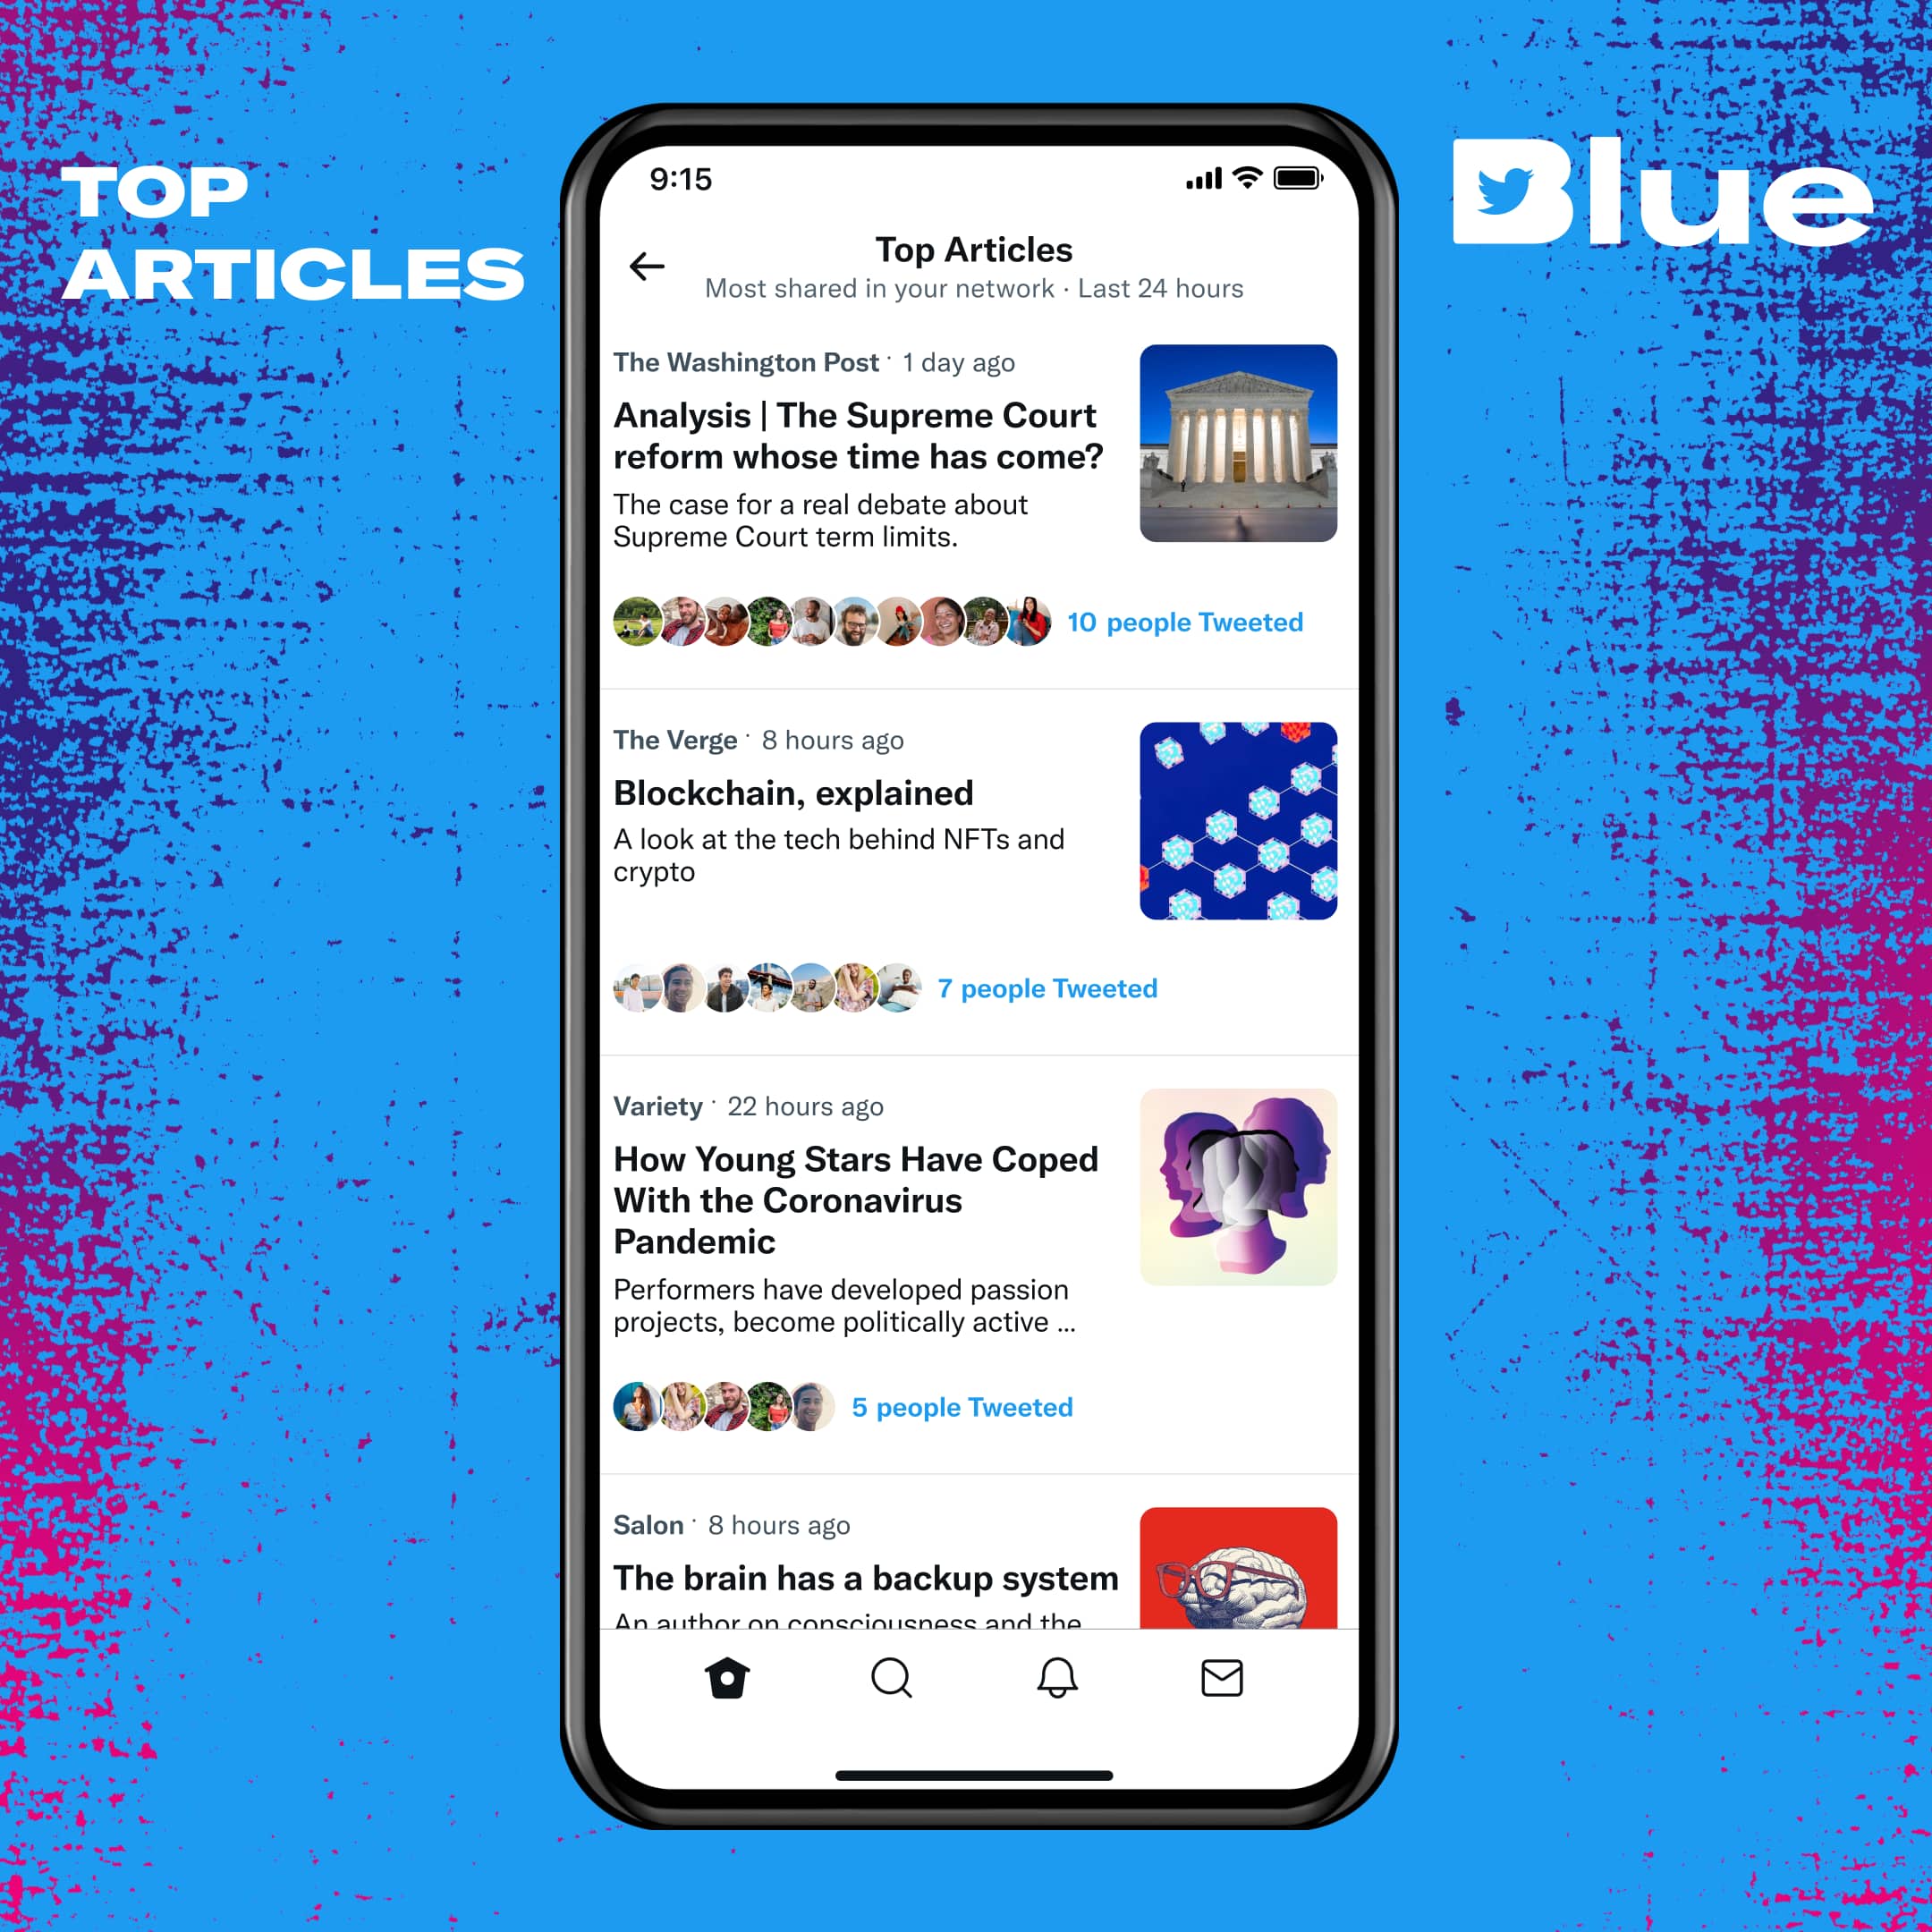 Promotional graphic for the Top Articles feature available with the Twitter Blue subscription on iPhone